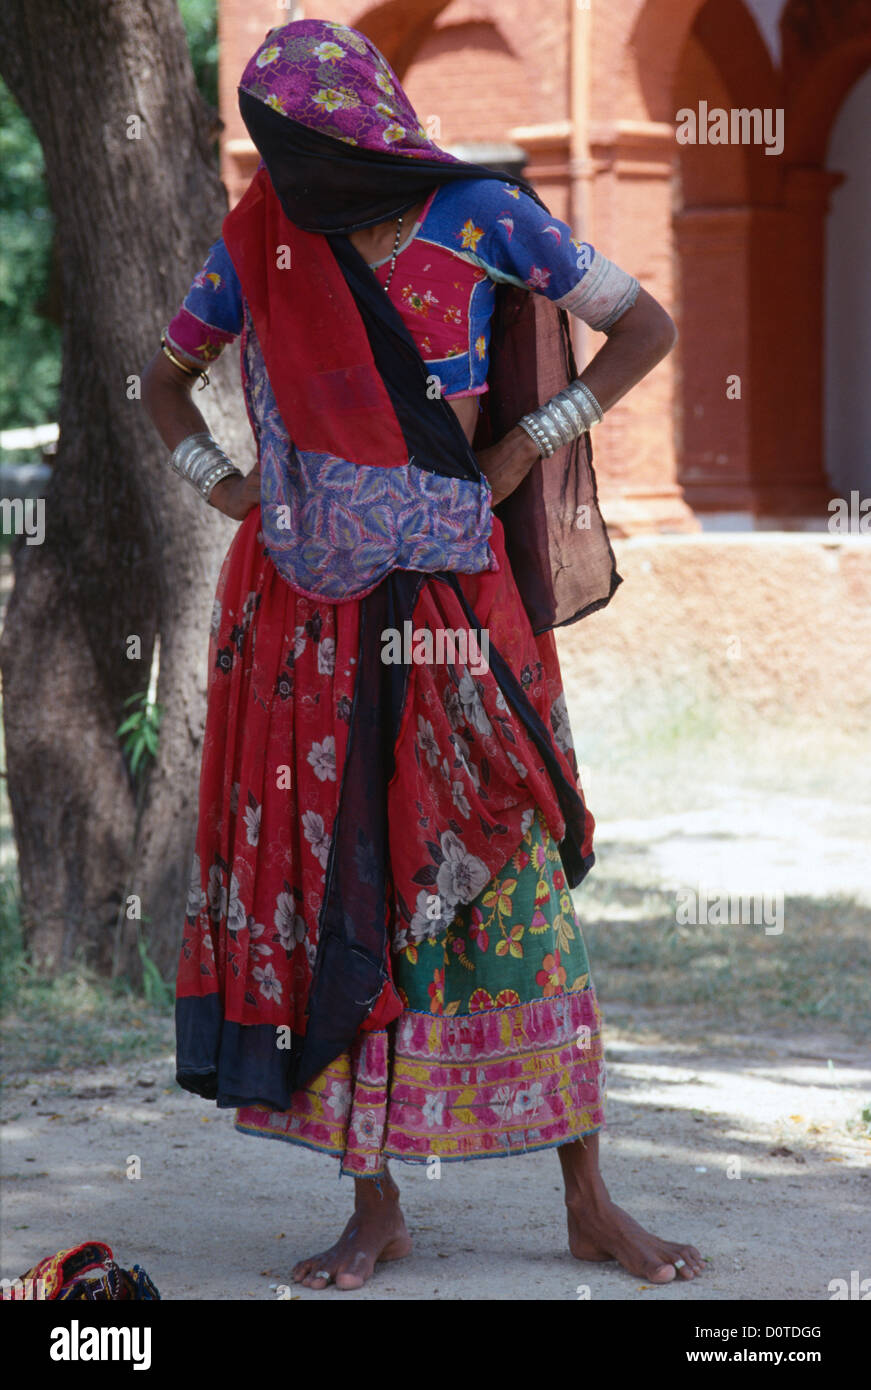 Veiled Rabari woman in traditional dress standing outside. Stock Photo